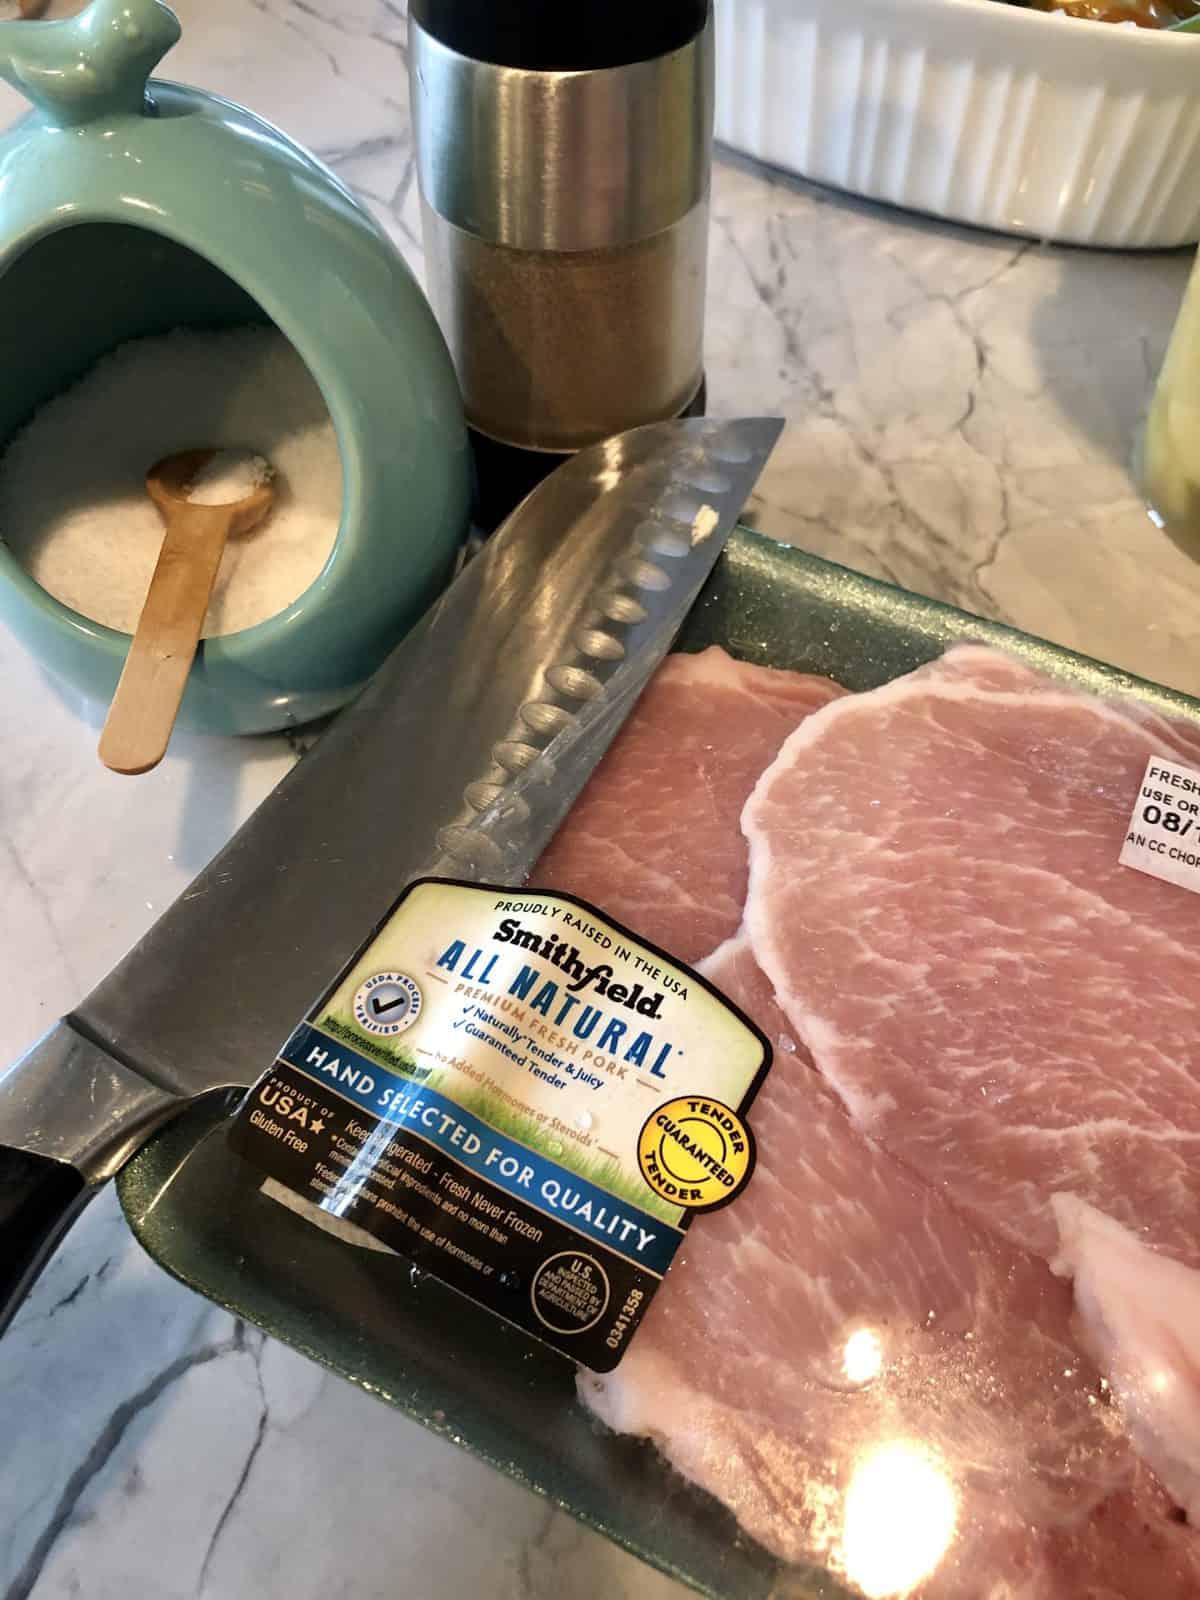 Smithfield All Natural pork chops uncooked and in package next to knife, salt, and pepper.